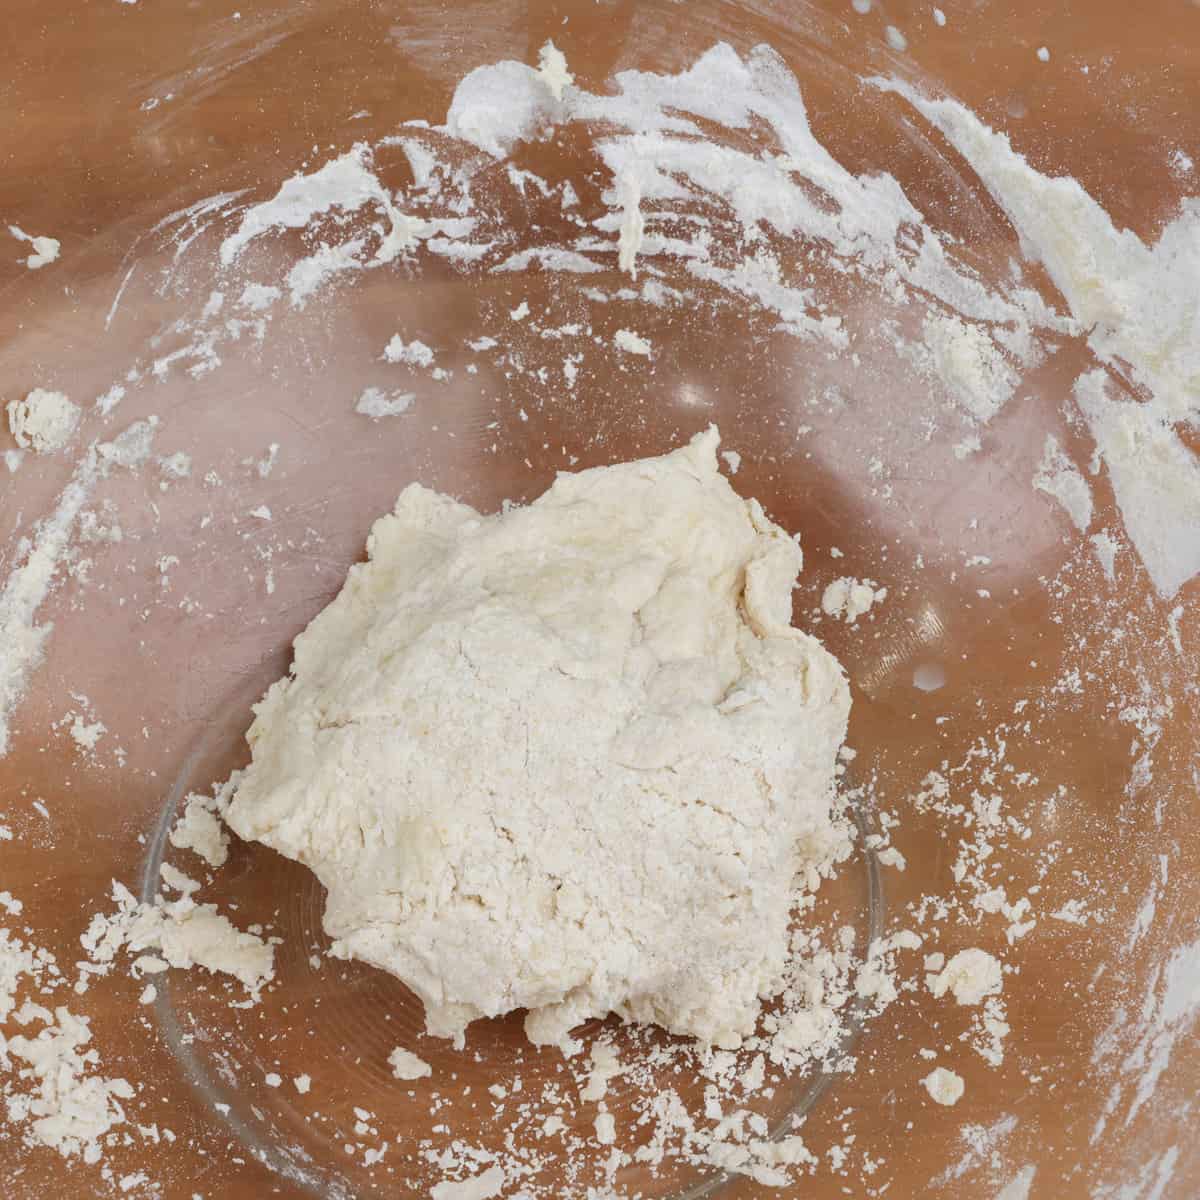 pizza dough in a mixing bowl before kneading.